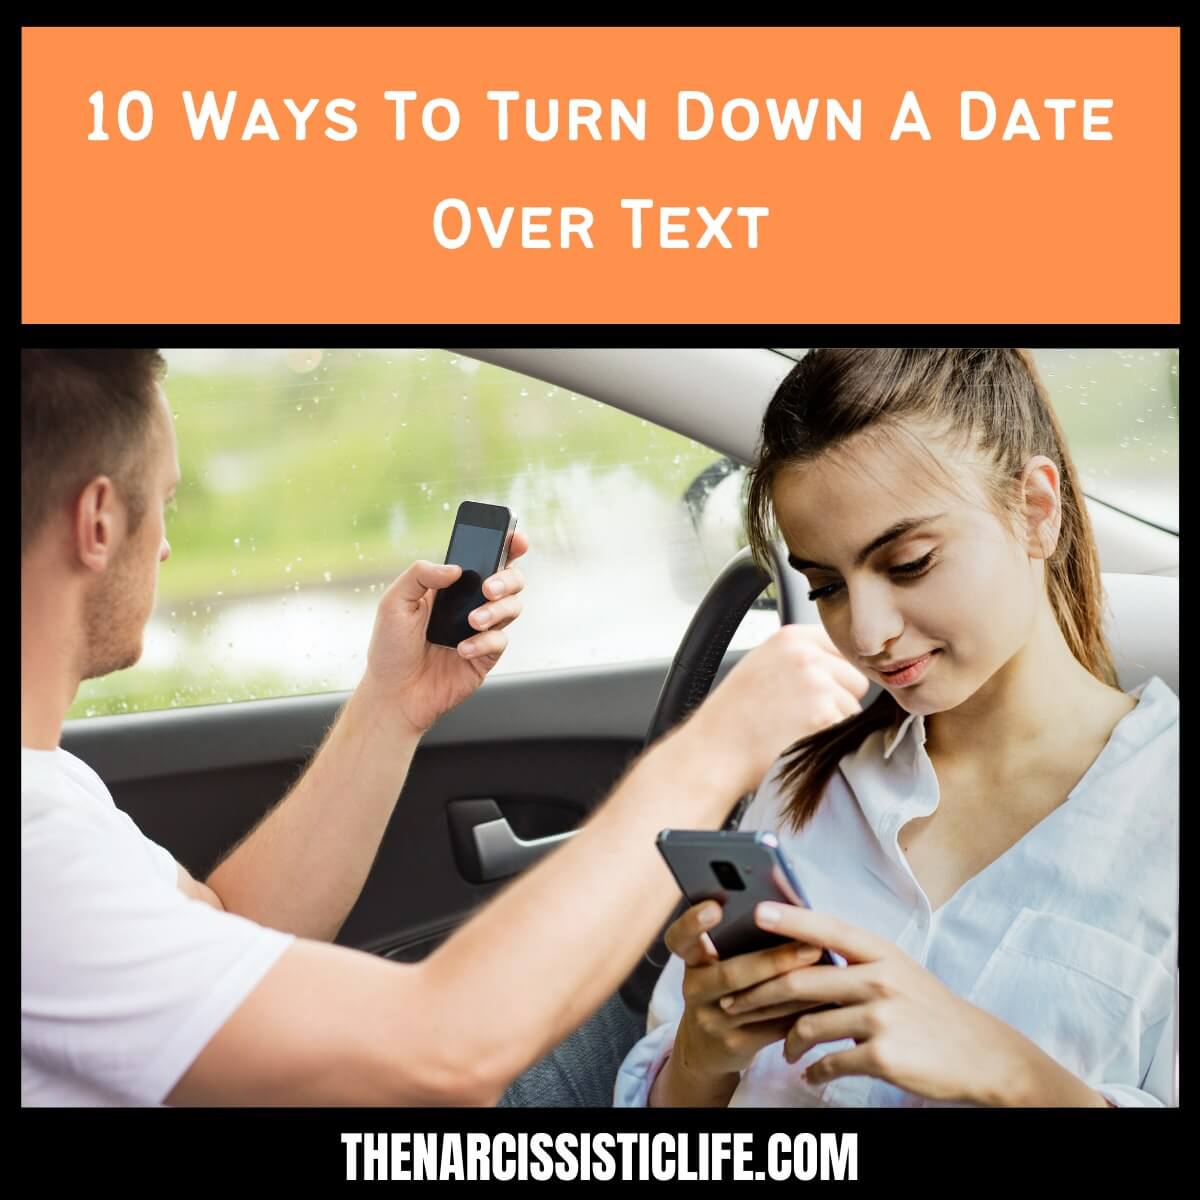 10 Ways To Turn Down A Date Over Text